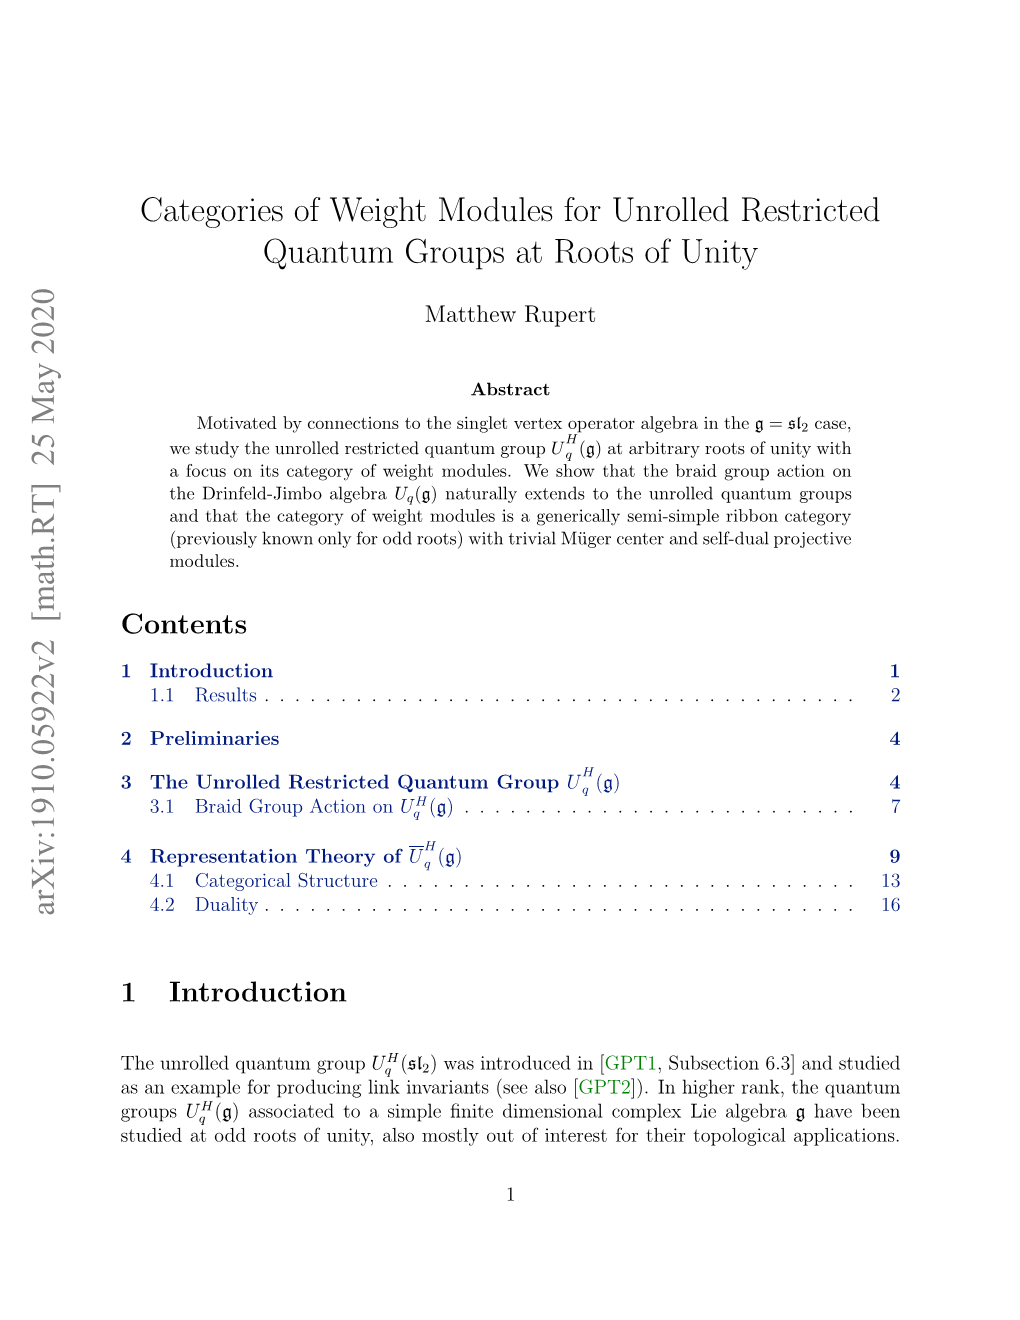 Categories of Weight Modules for Unrolled Restricted Quantum